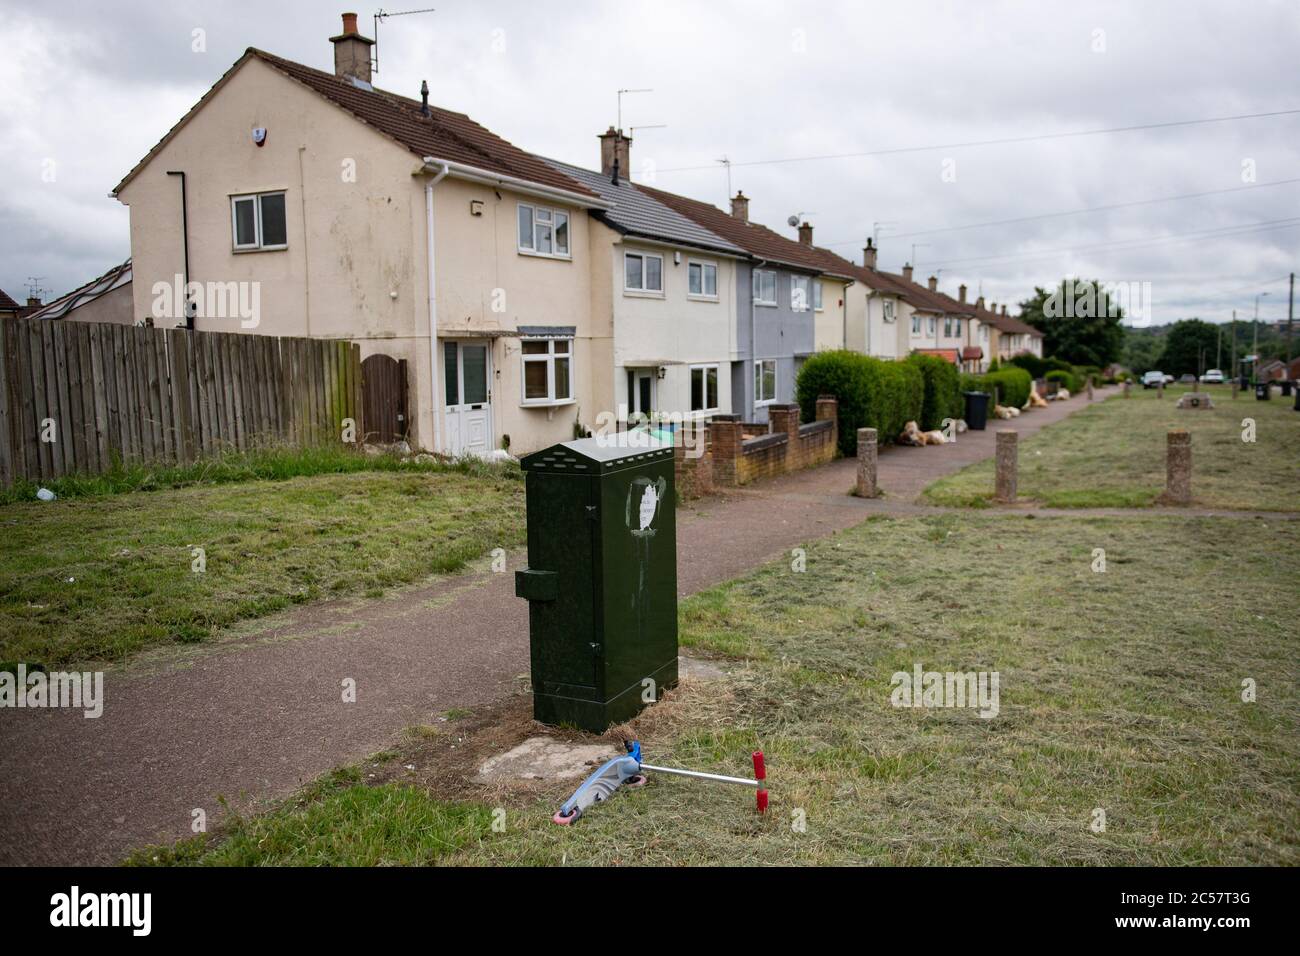 Bowhill Grove in Leicester where the localised lockdown boundary cuts through. A local lockdown has been imposed following a spike in coronavirus cases in the city. Stock Photo